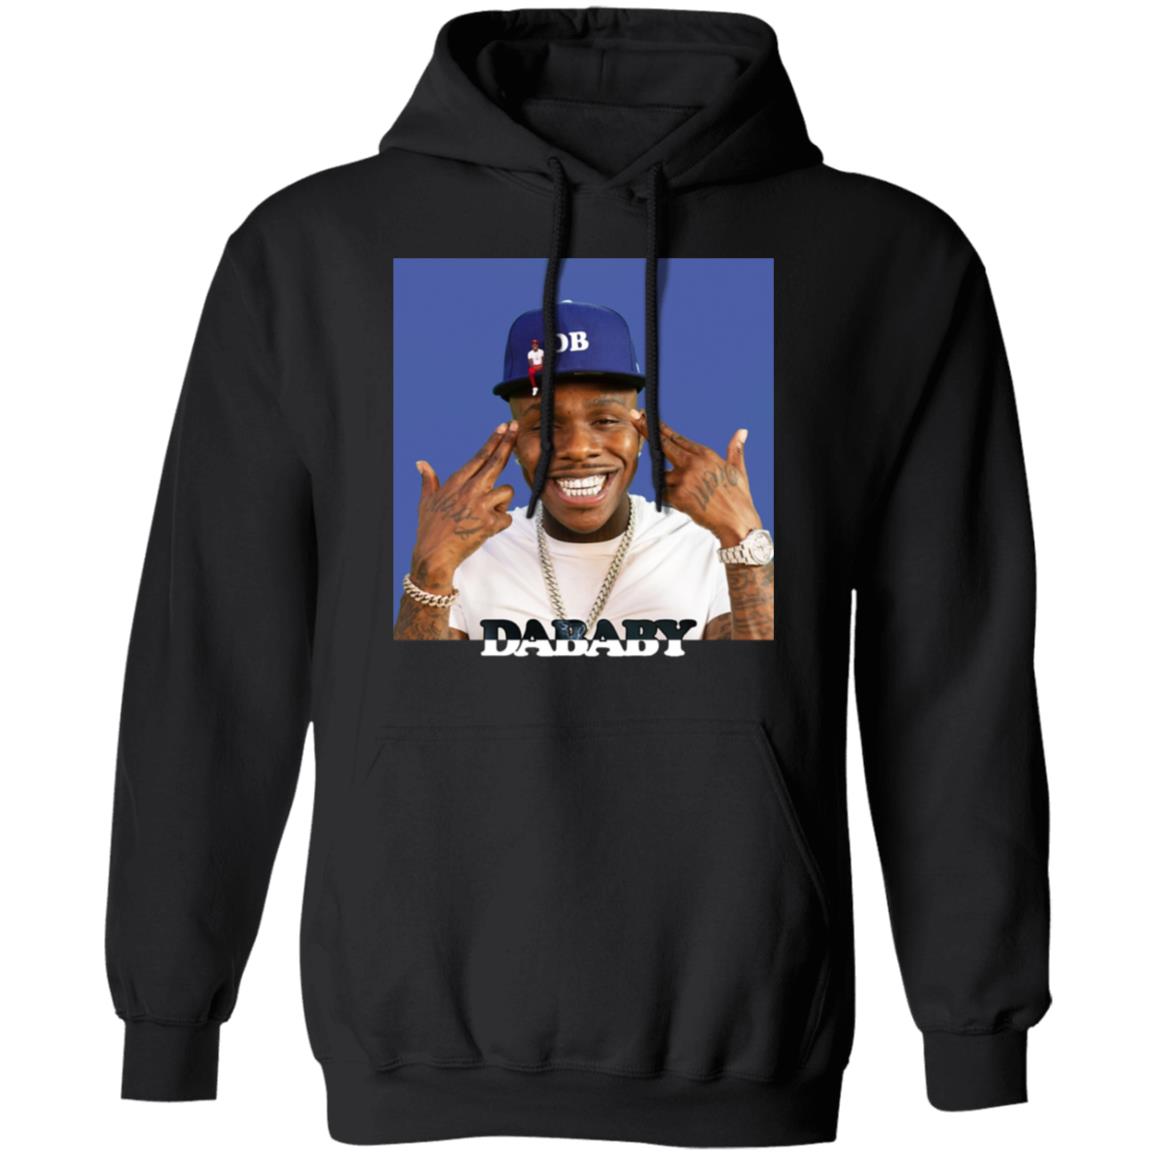 DaBaby Store - Official DaBaby® Merch